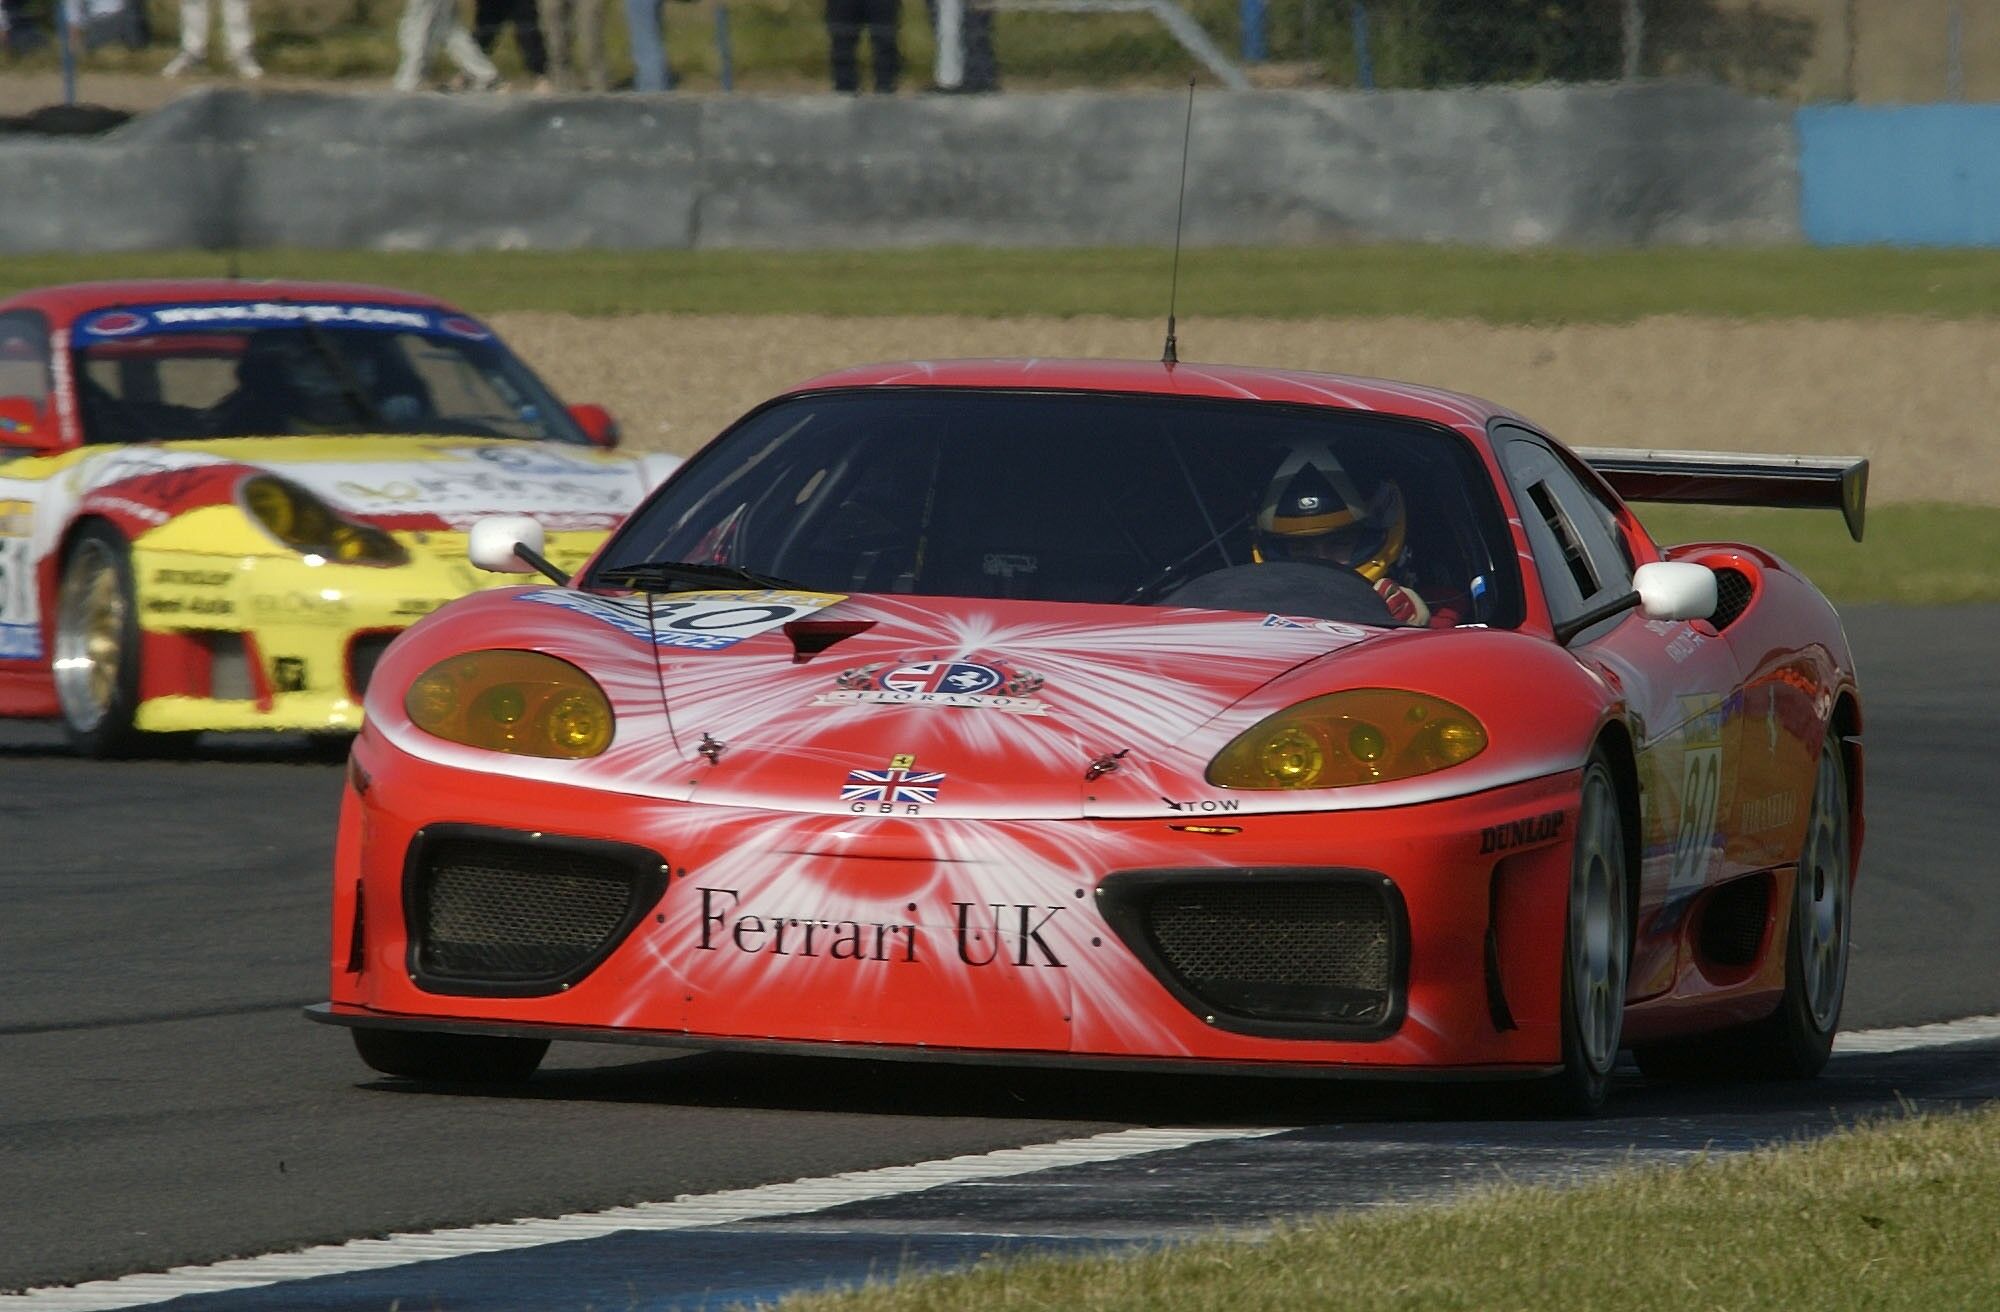 Team Maranello Concessionaires ran a third car at Donington Park for Guy Smith and Andrew Kirkaldy